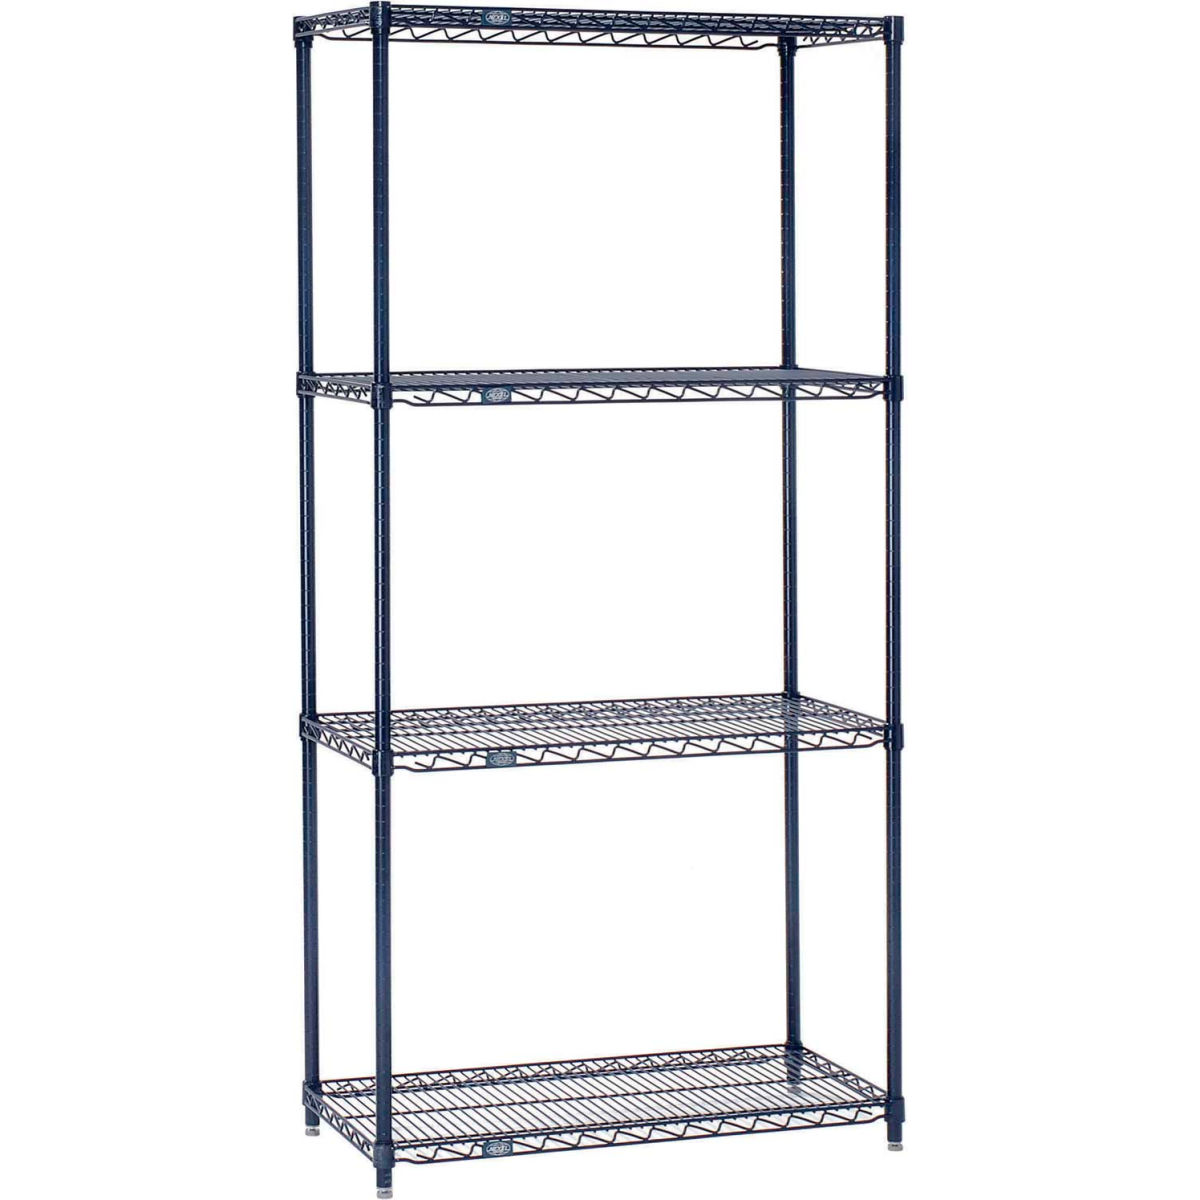 Picture of Global Industrial 14245N 54 x 24 x 14 in. Nexelon Blue Epoxy Starter Wire Shelving